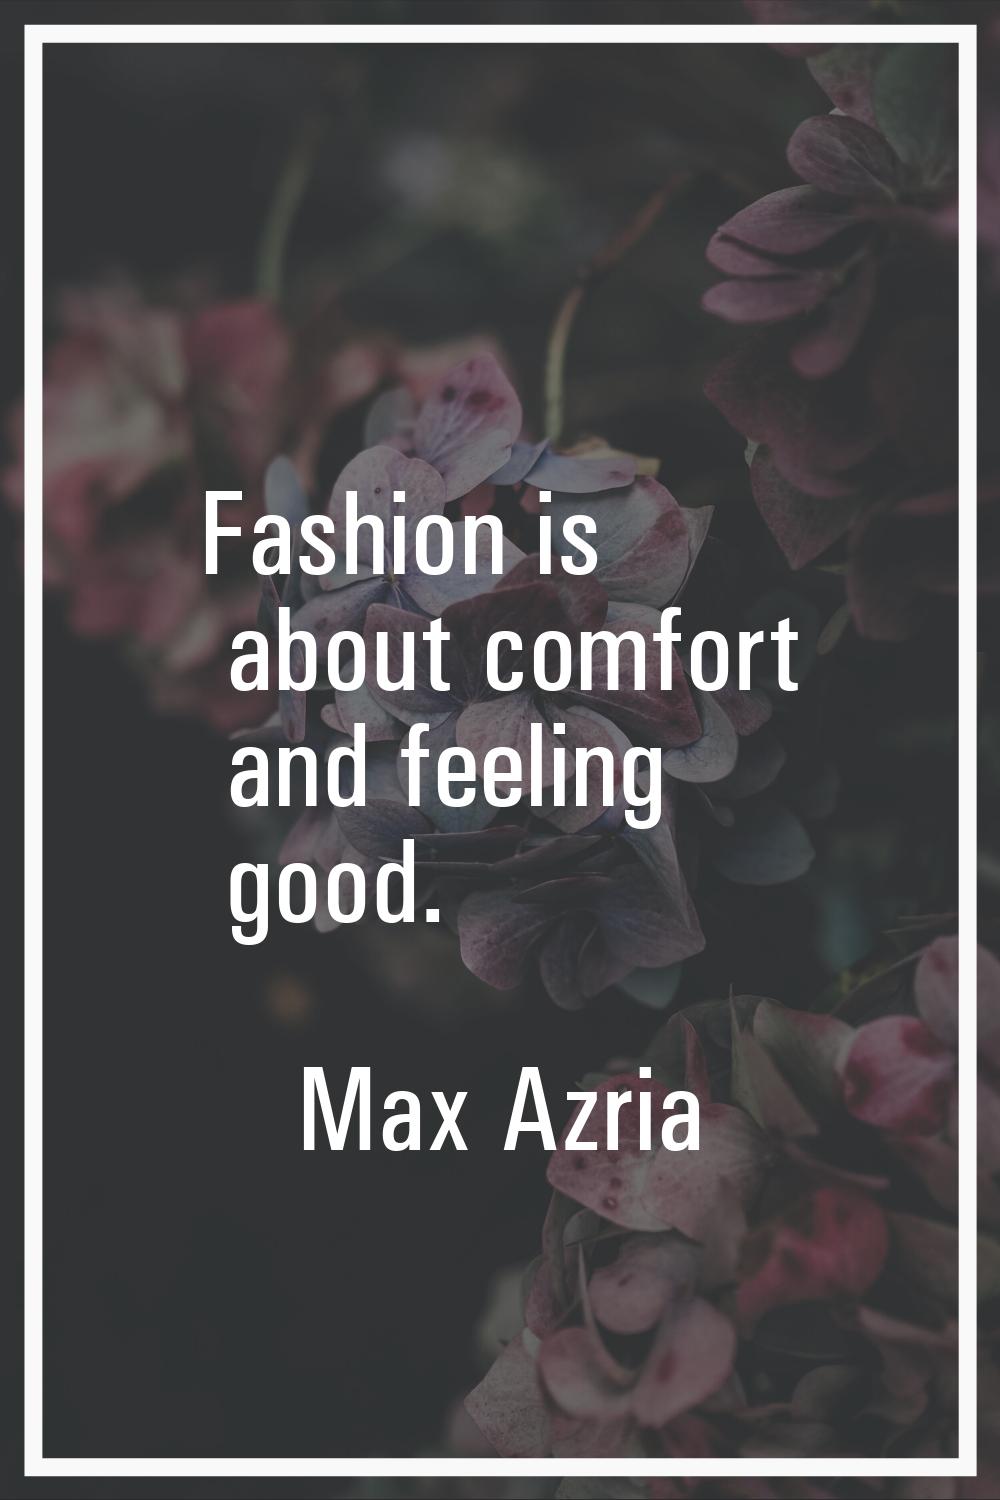 Fashion is about comfort and feeling good.